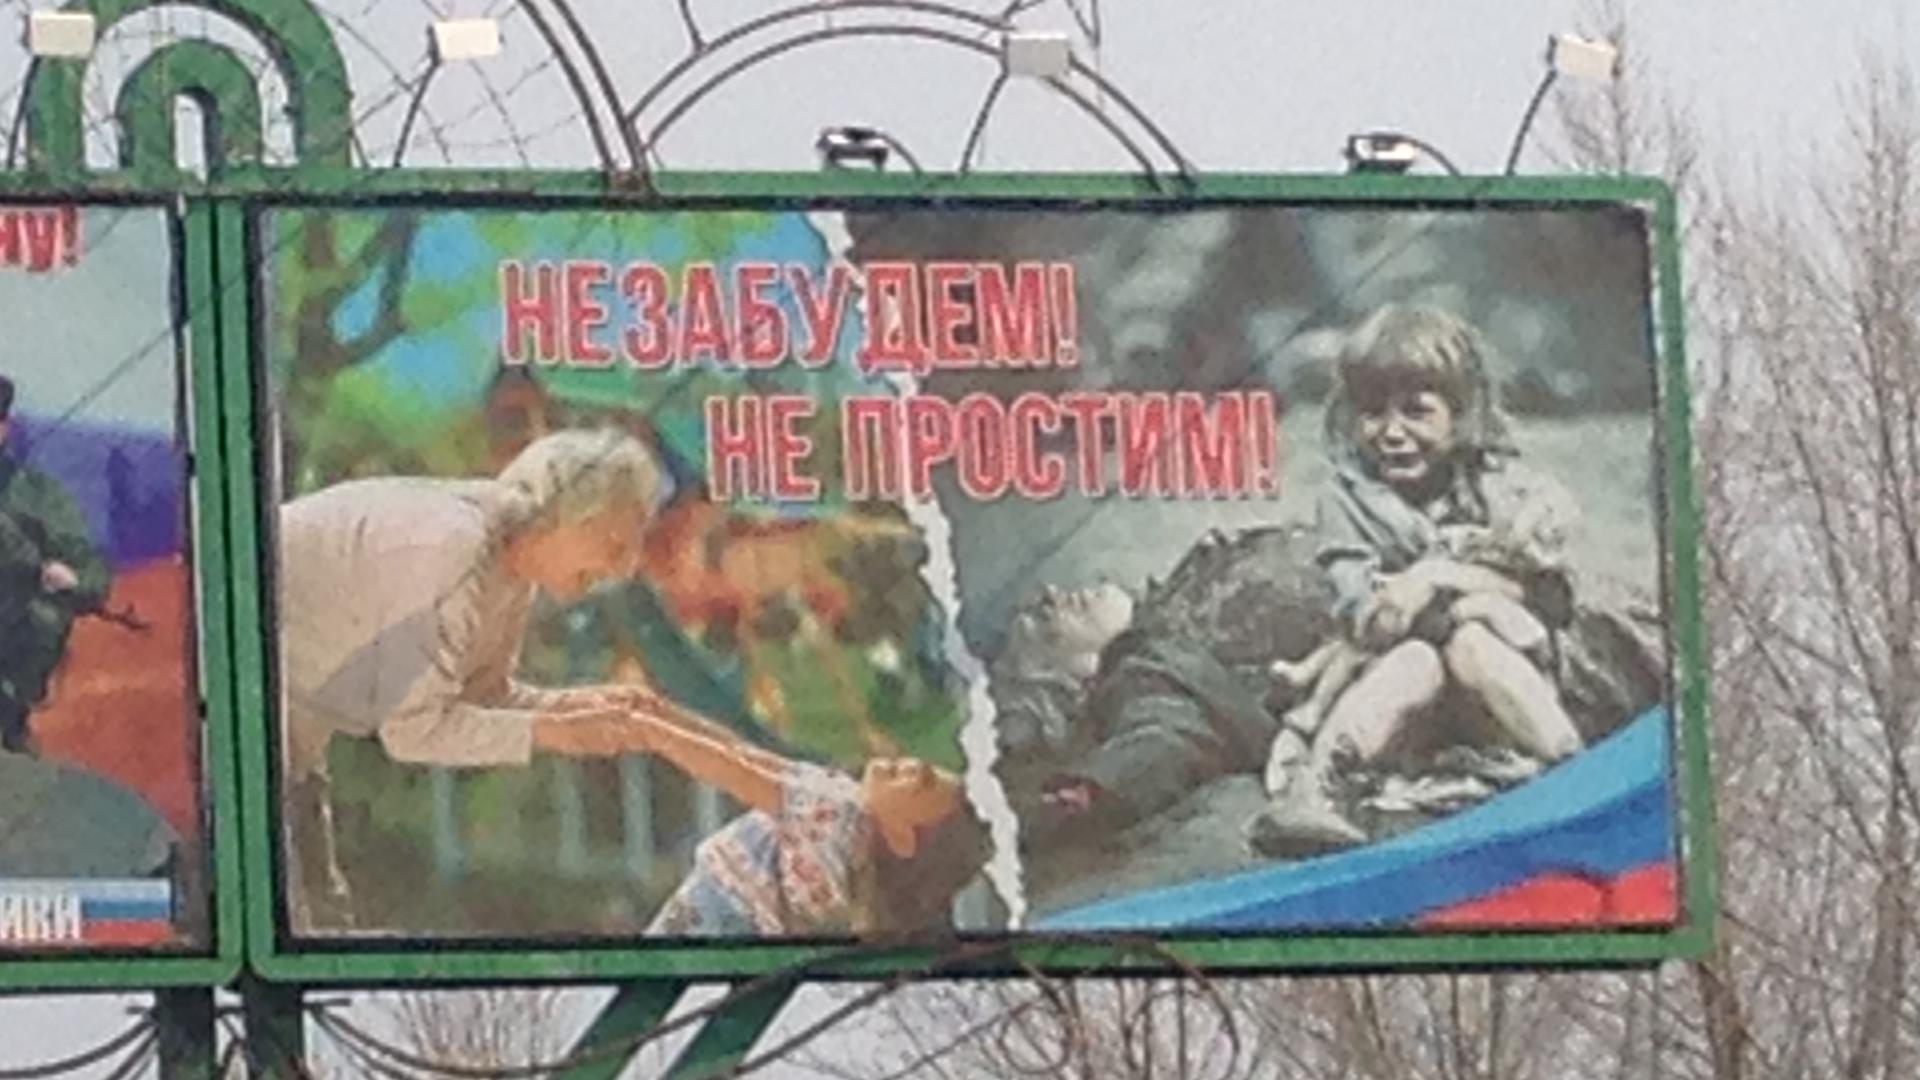 A manufactured story in Eastern Ukraine. The billboard reads, "We won't forget, we won't forgive," but Antelava says the photo of the girl has been faked.